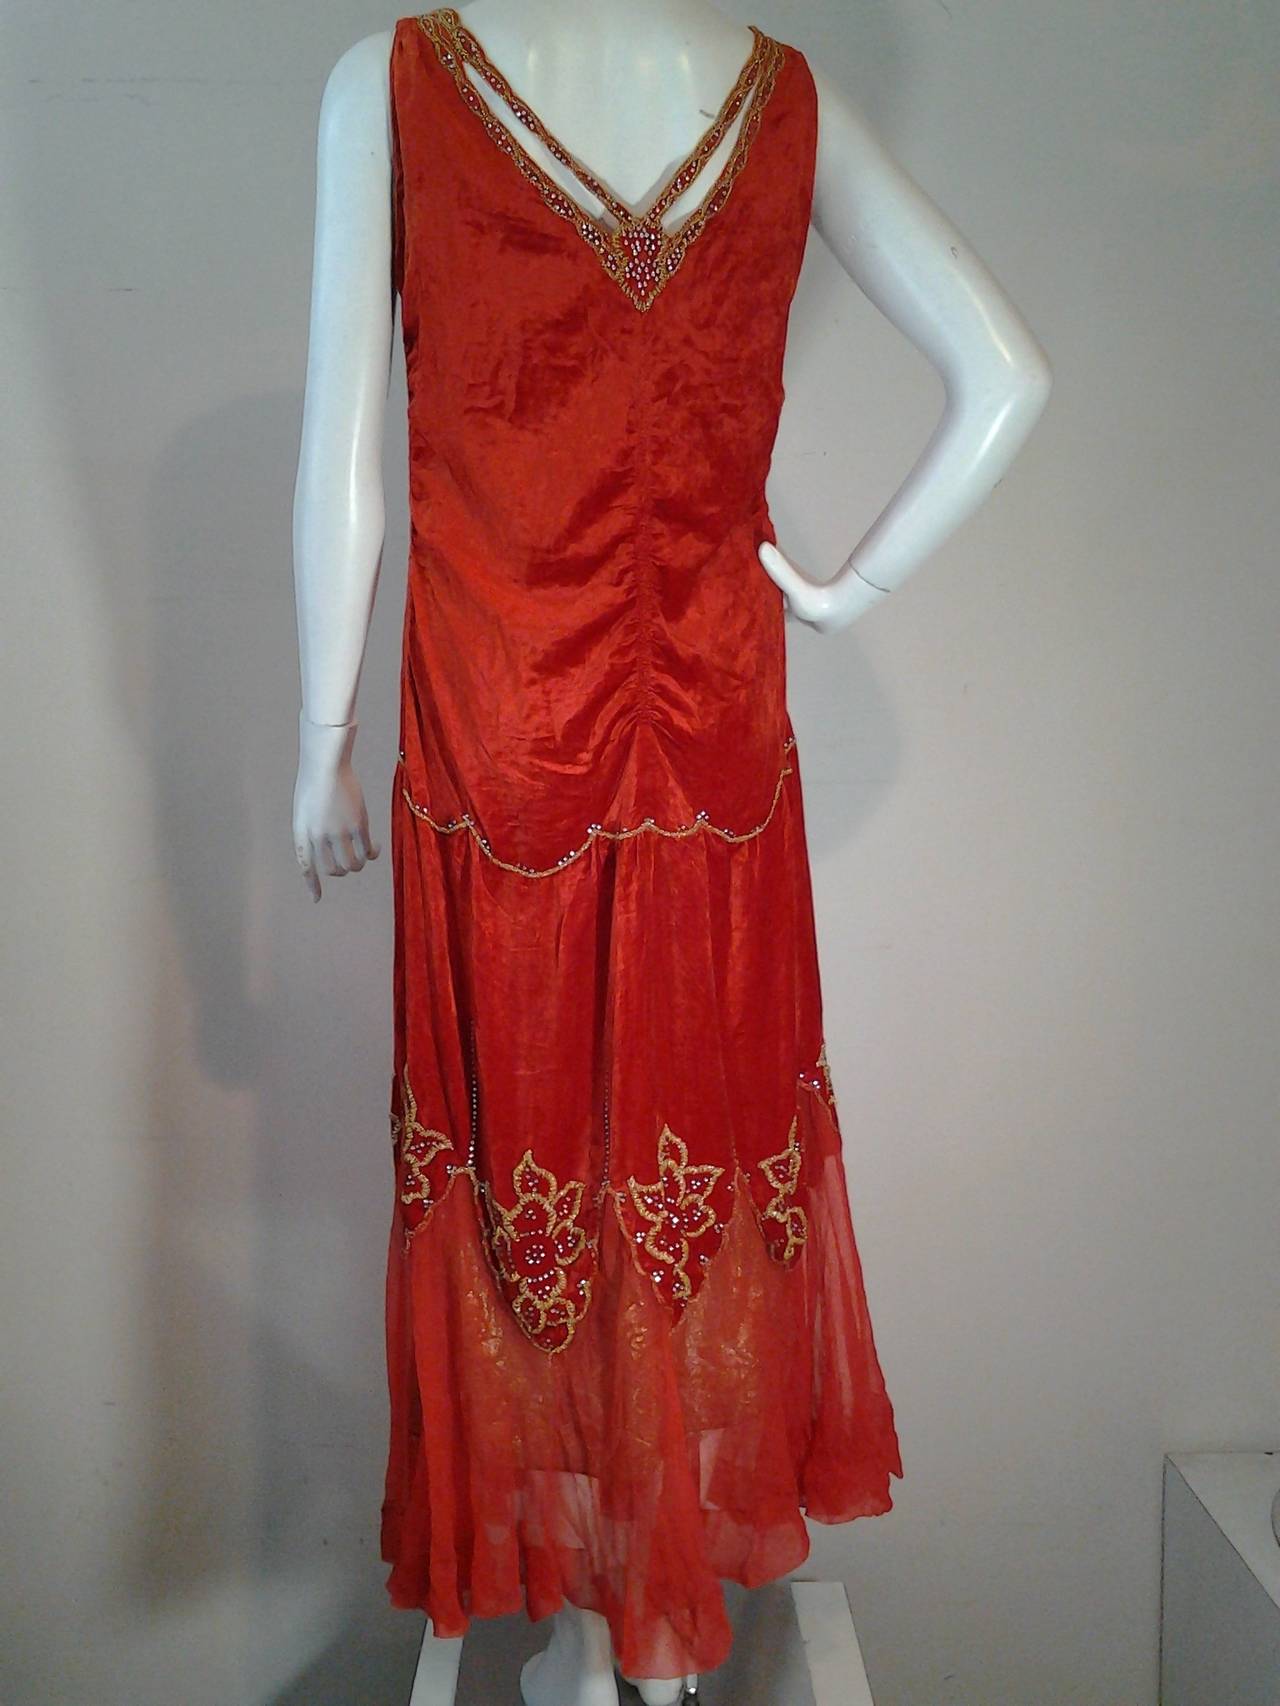 A stunning 1920s crimson panne velvet dropped-waist gown with lame lace underpanel, underslip, chiffon ruffled hemline, beaded florals and set rhinestones.  Neckline is a gorgeous butterfly with cut-out silhouette.  Absolutely beautiful!